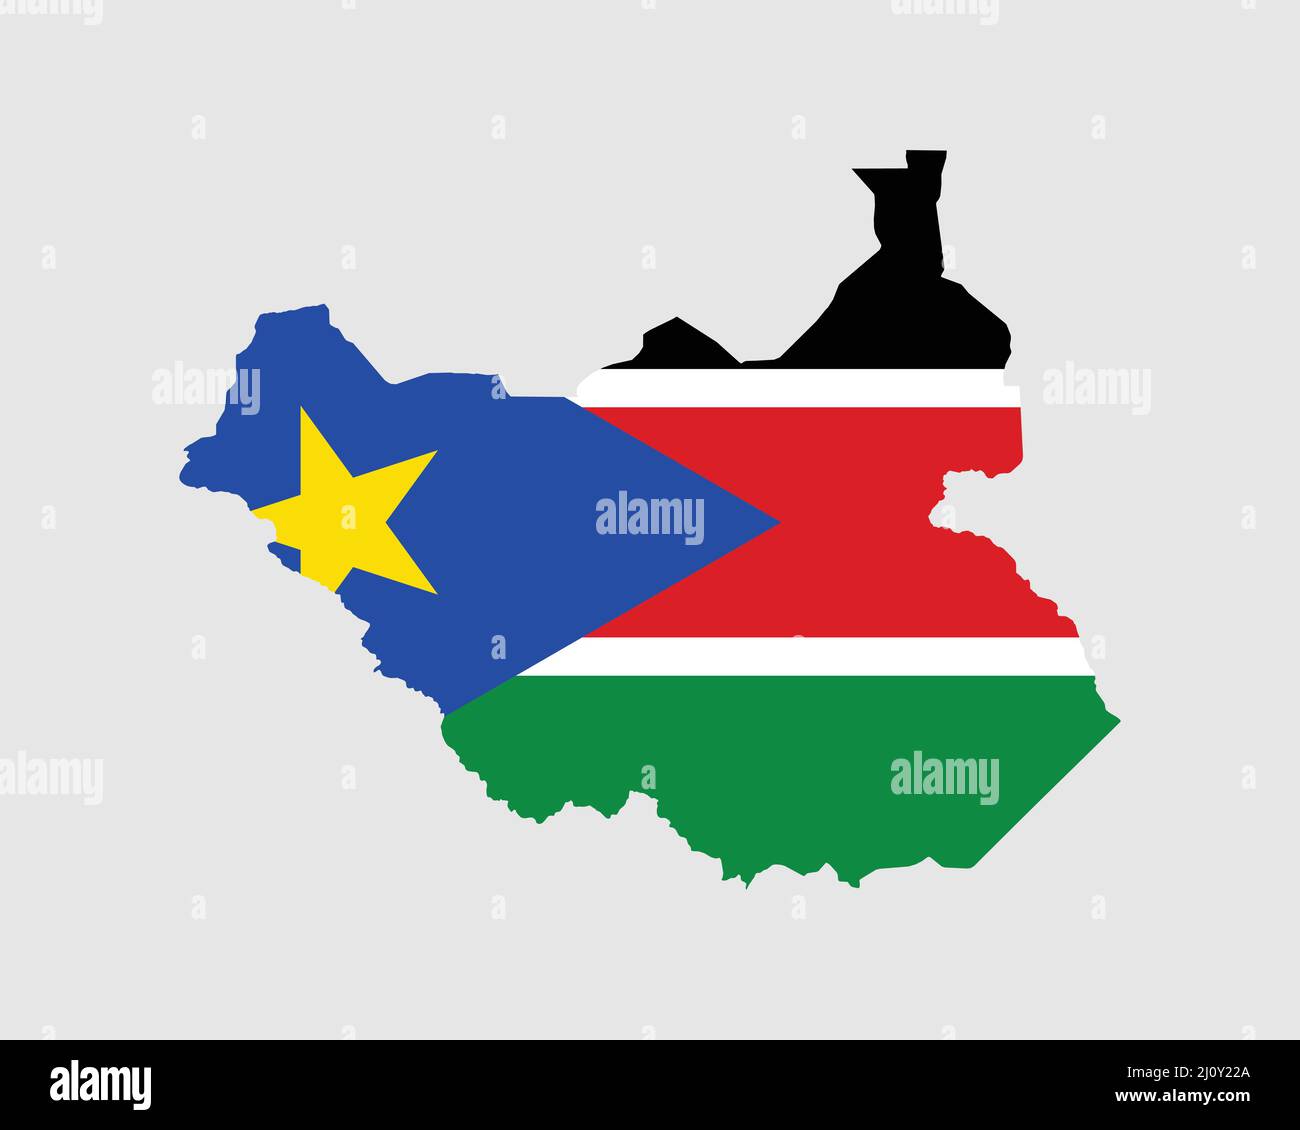 South Sudan Flag Map Map Of The Republic Of South Sudan With The South Sudanese Country Banner